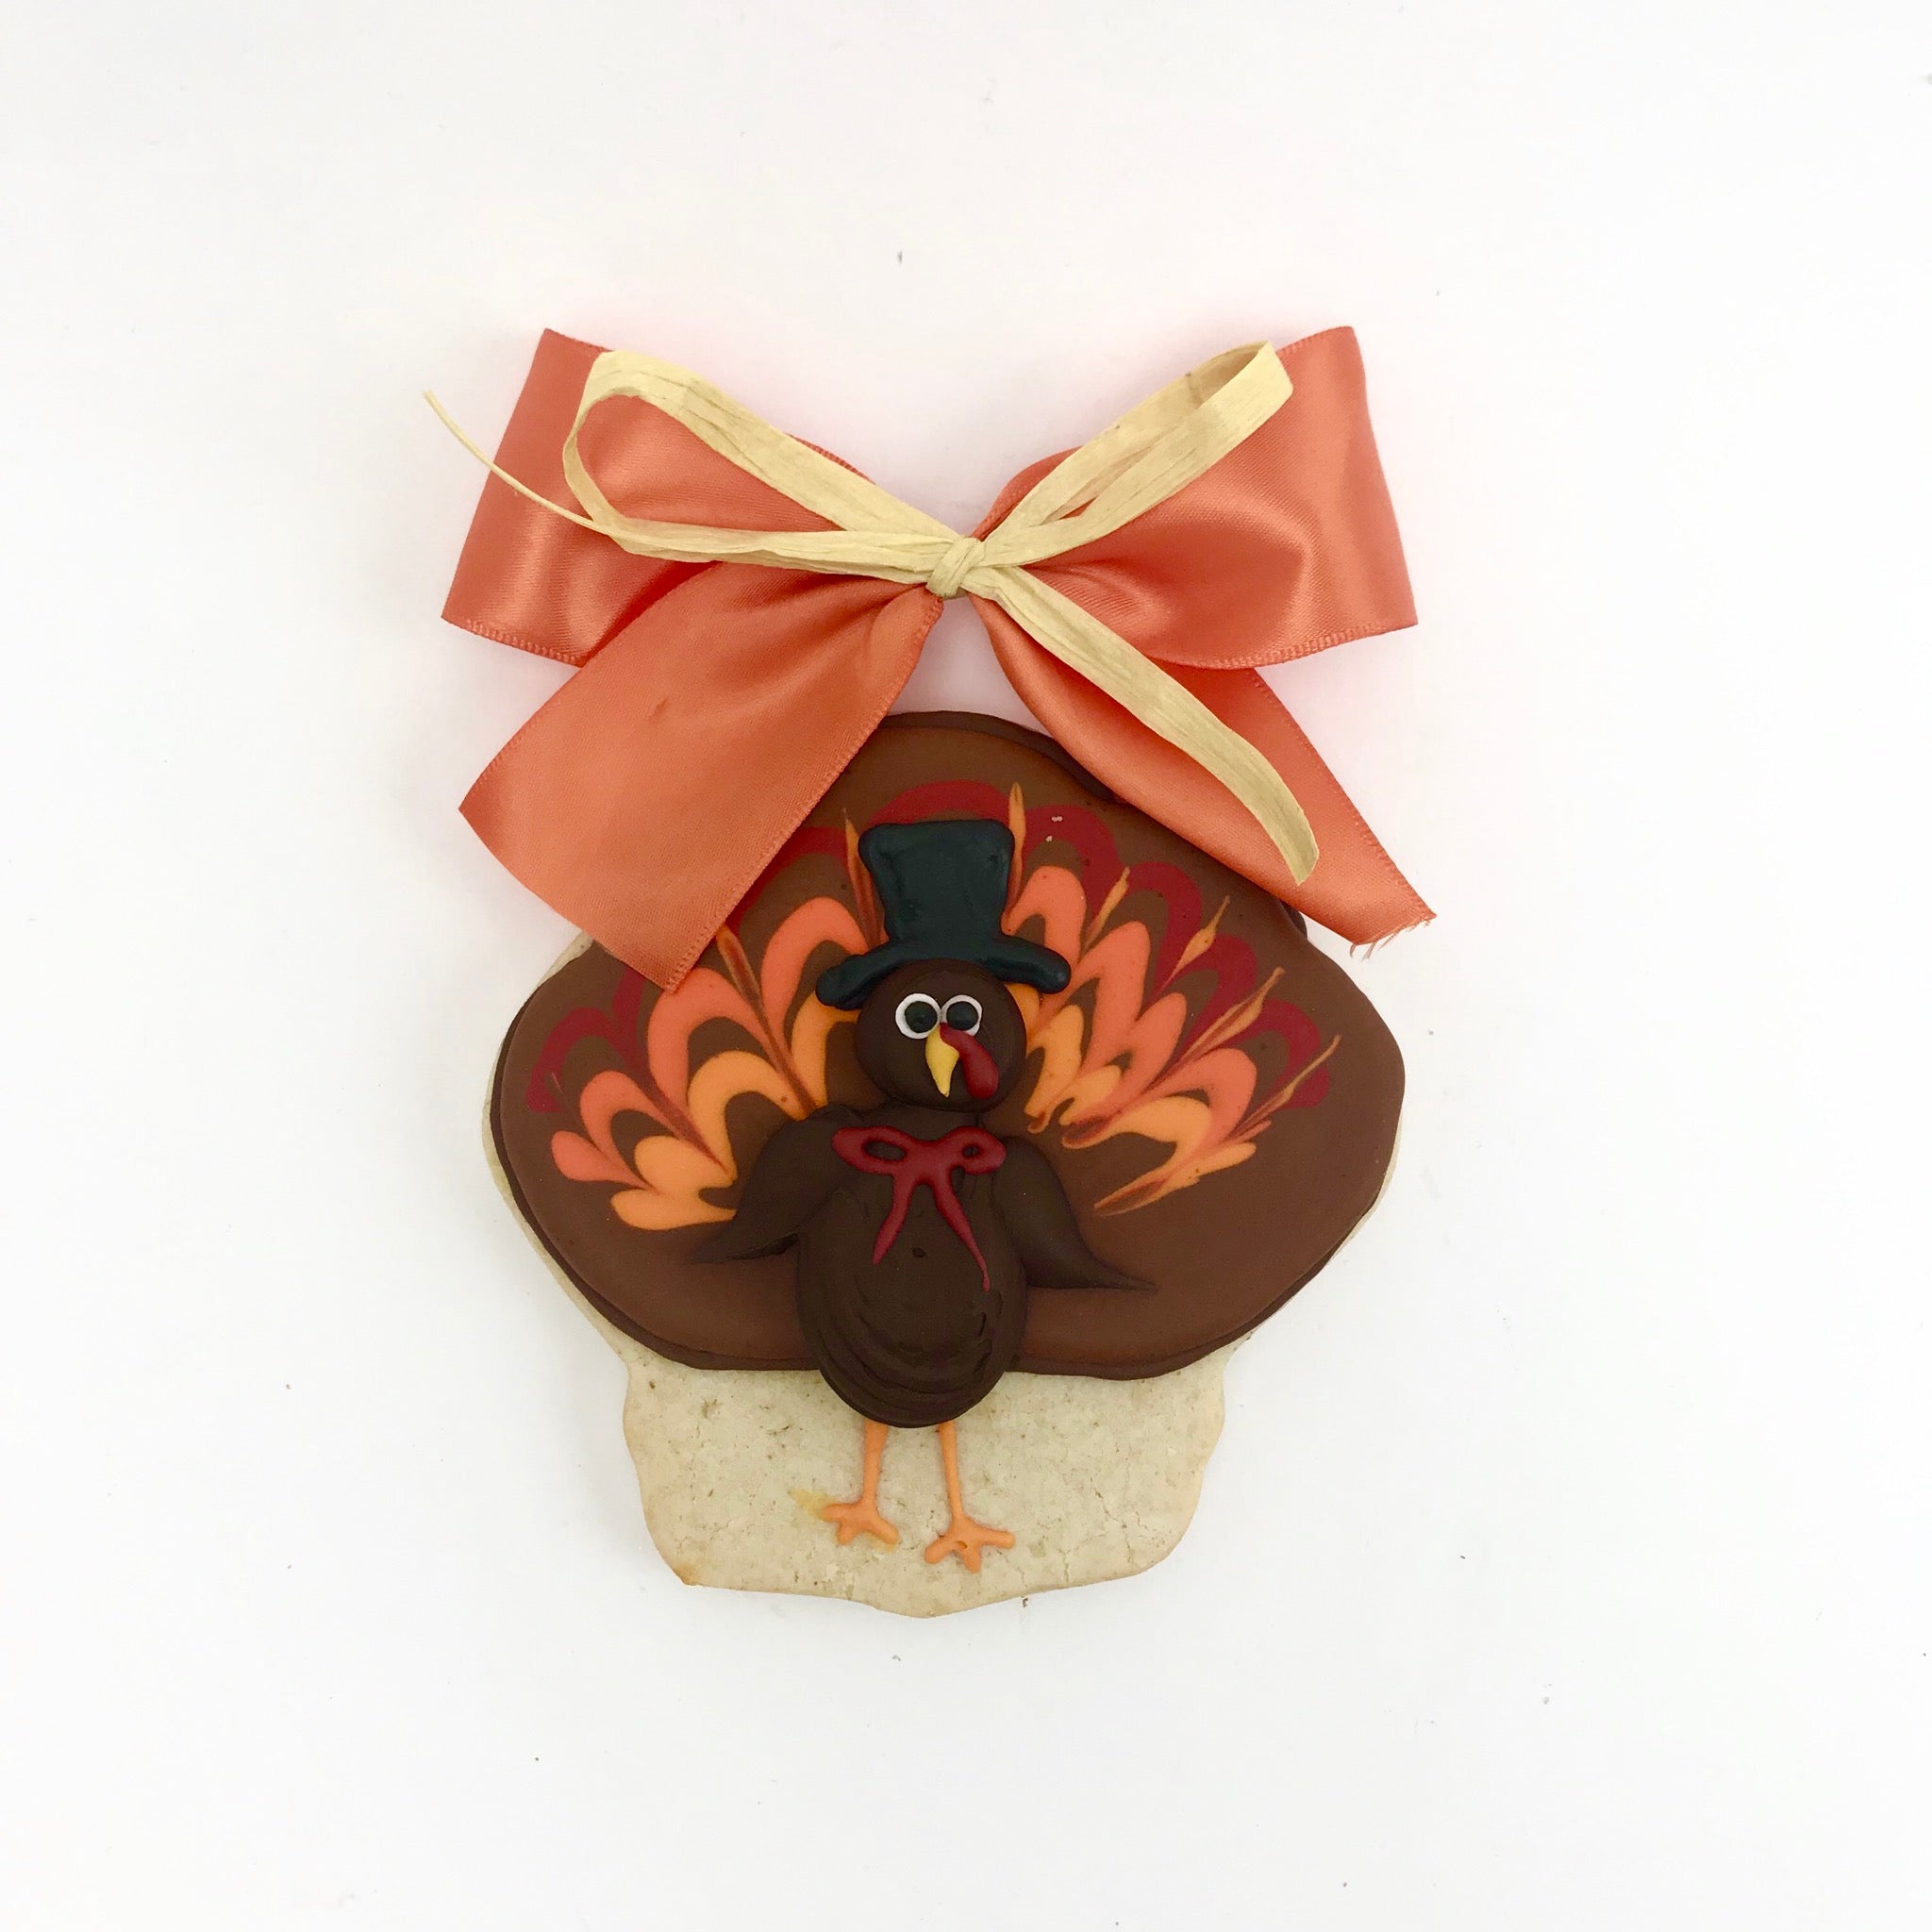 Decorated Turkey Sugar Cookie with ribbons